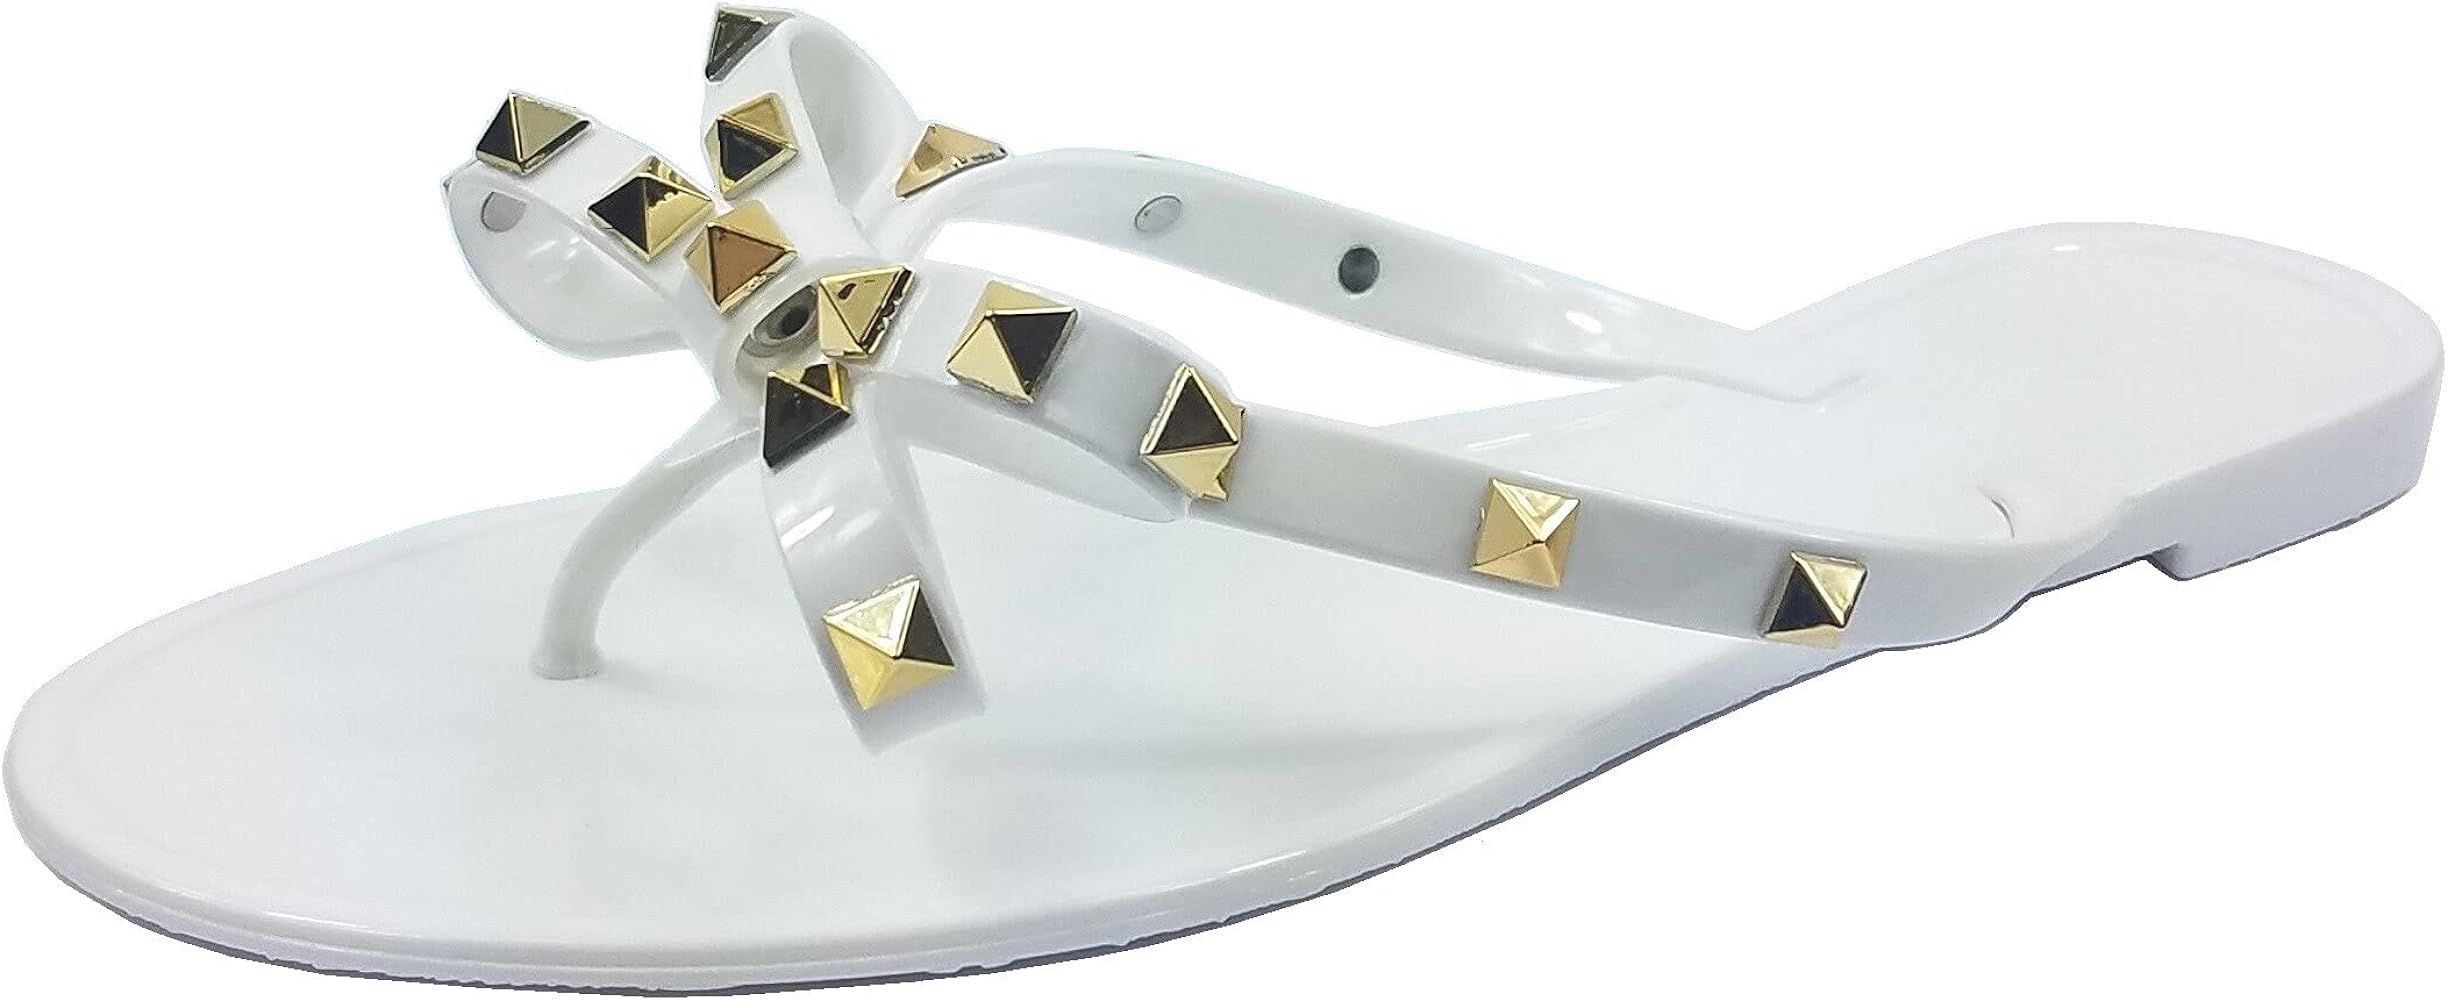 Womens Studded Flip Flops with Bow Open Toe Jelly Sandals | Amazon (US)